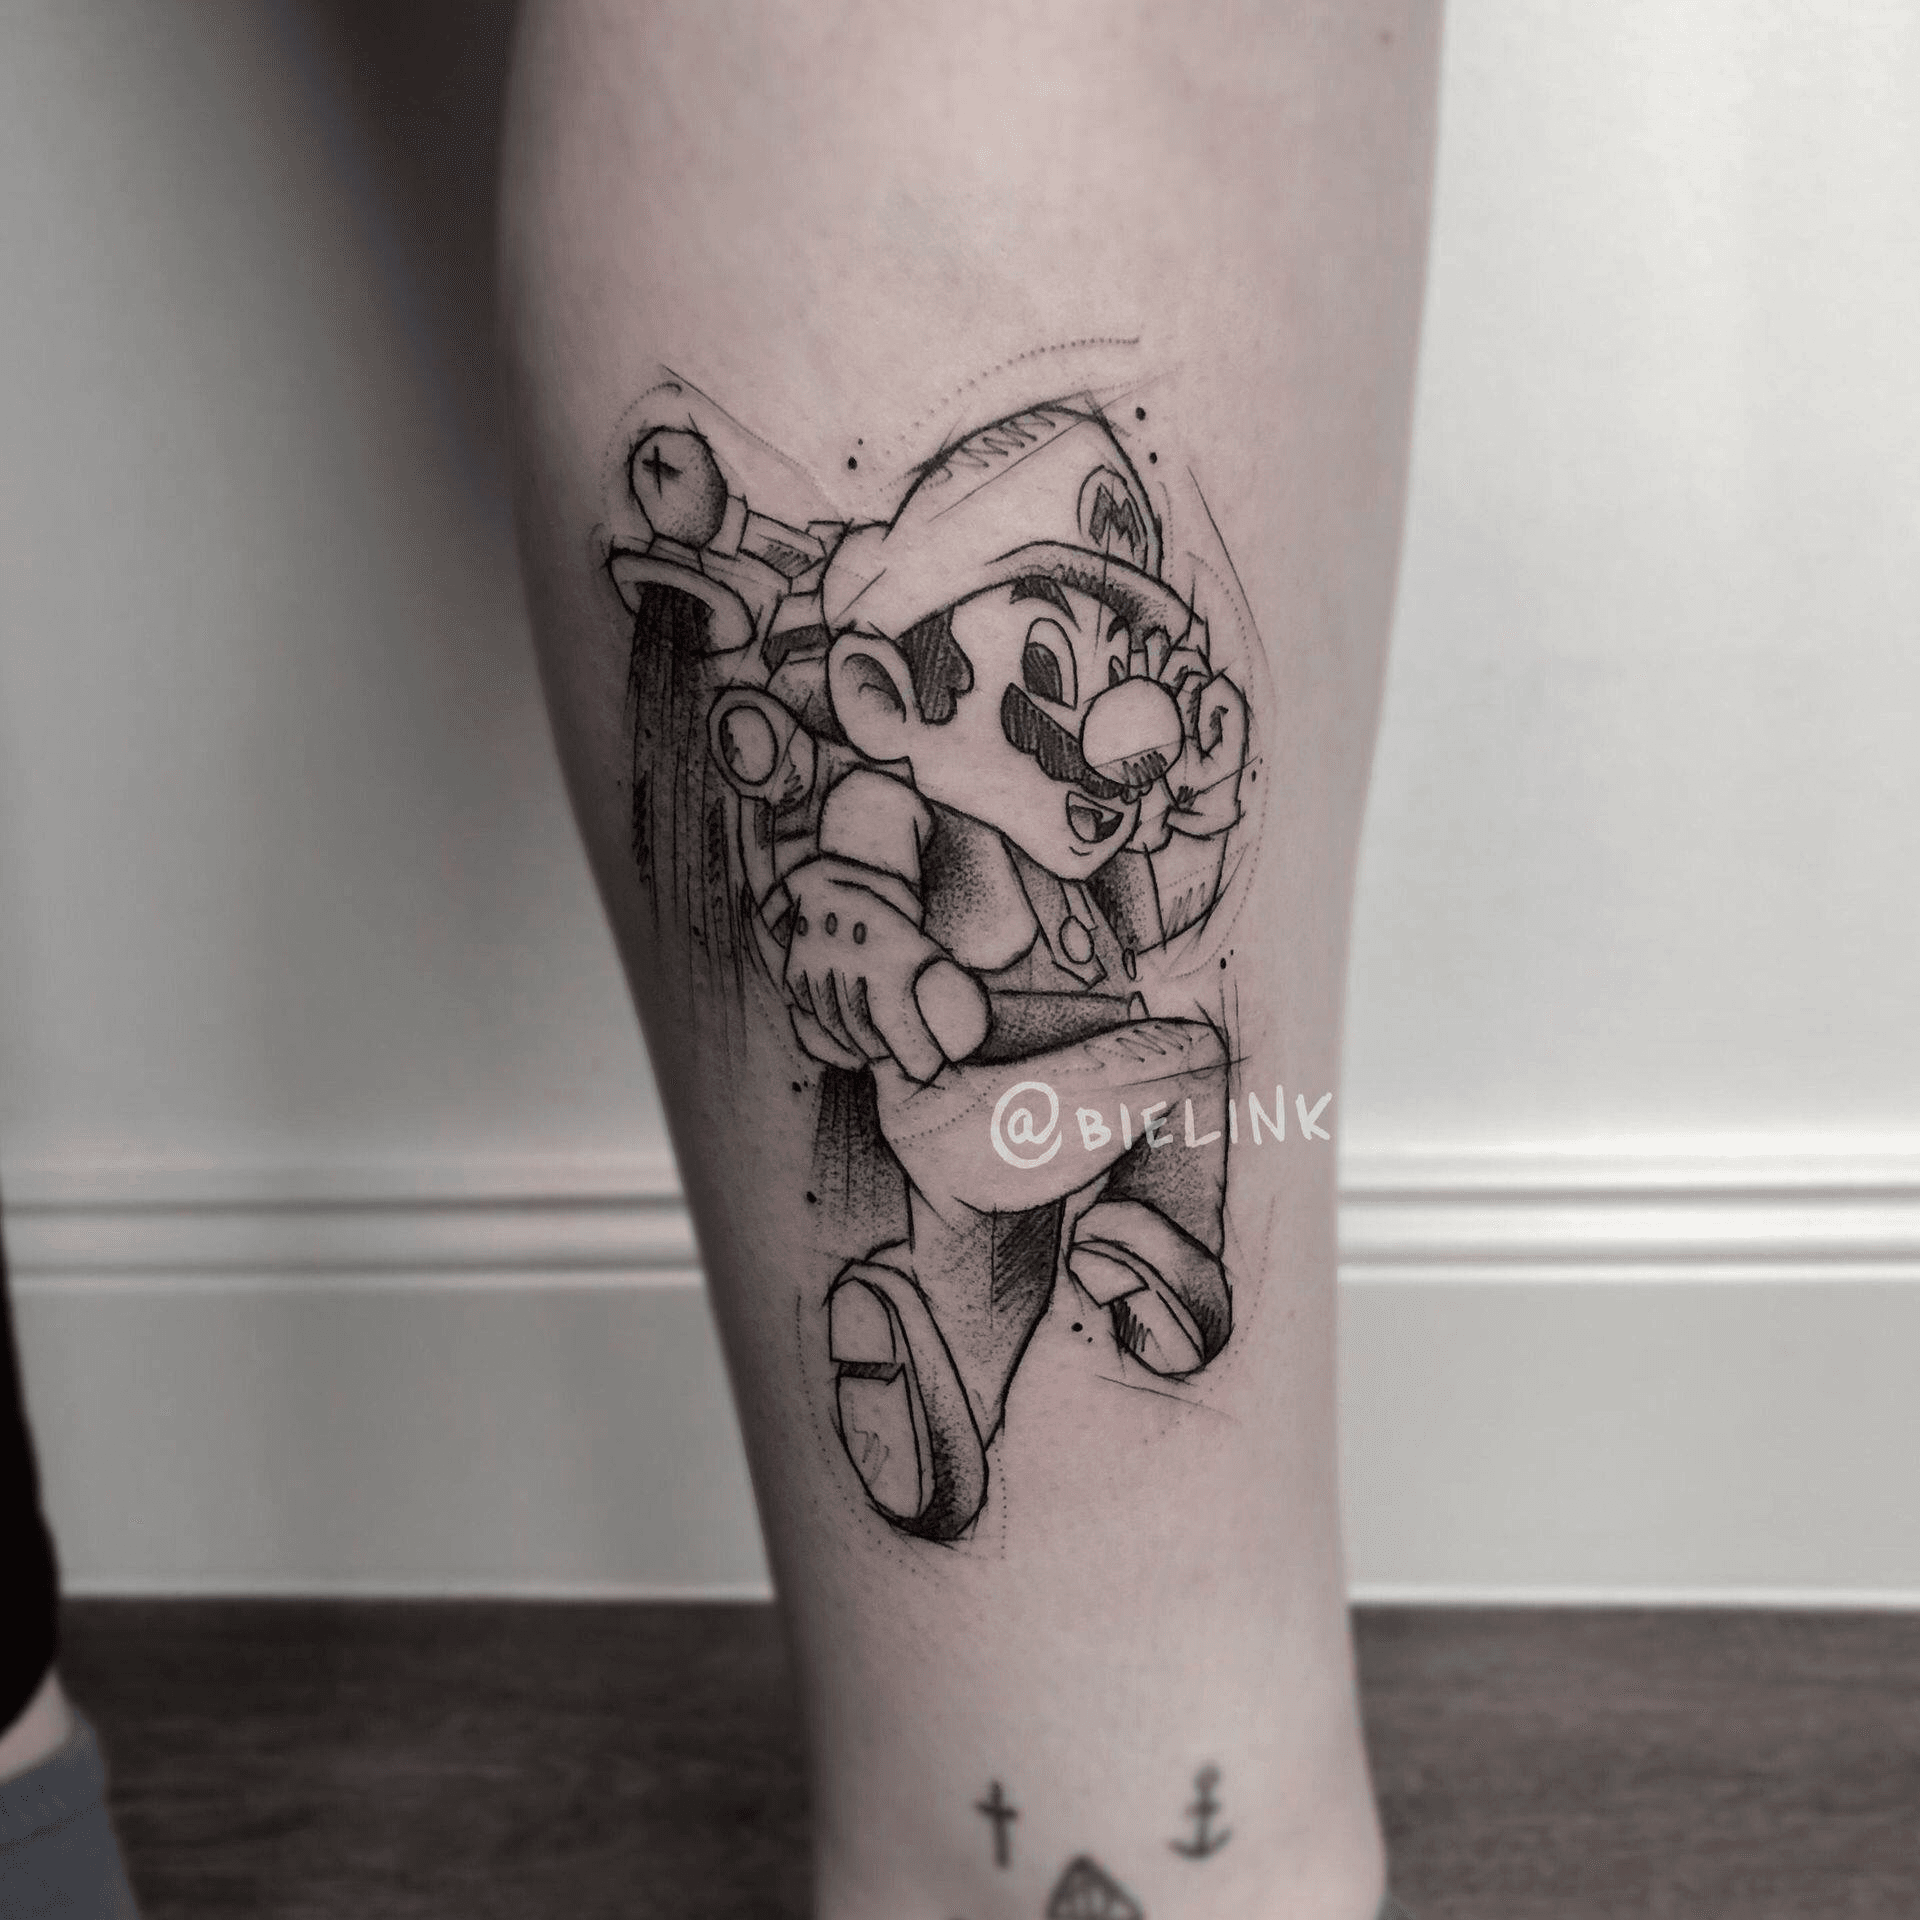 Tattoo uploaded by Timo Ro  Super Paper Mario Nintendo Video Games  butterfly  Tattoodo